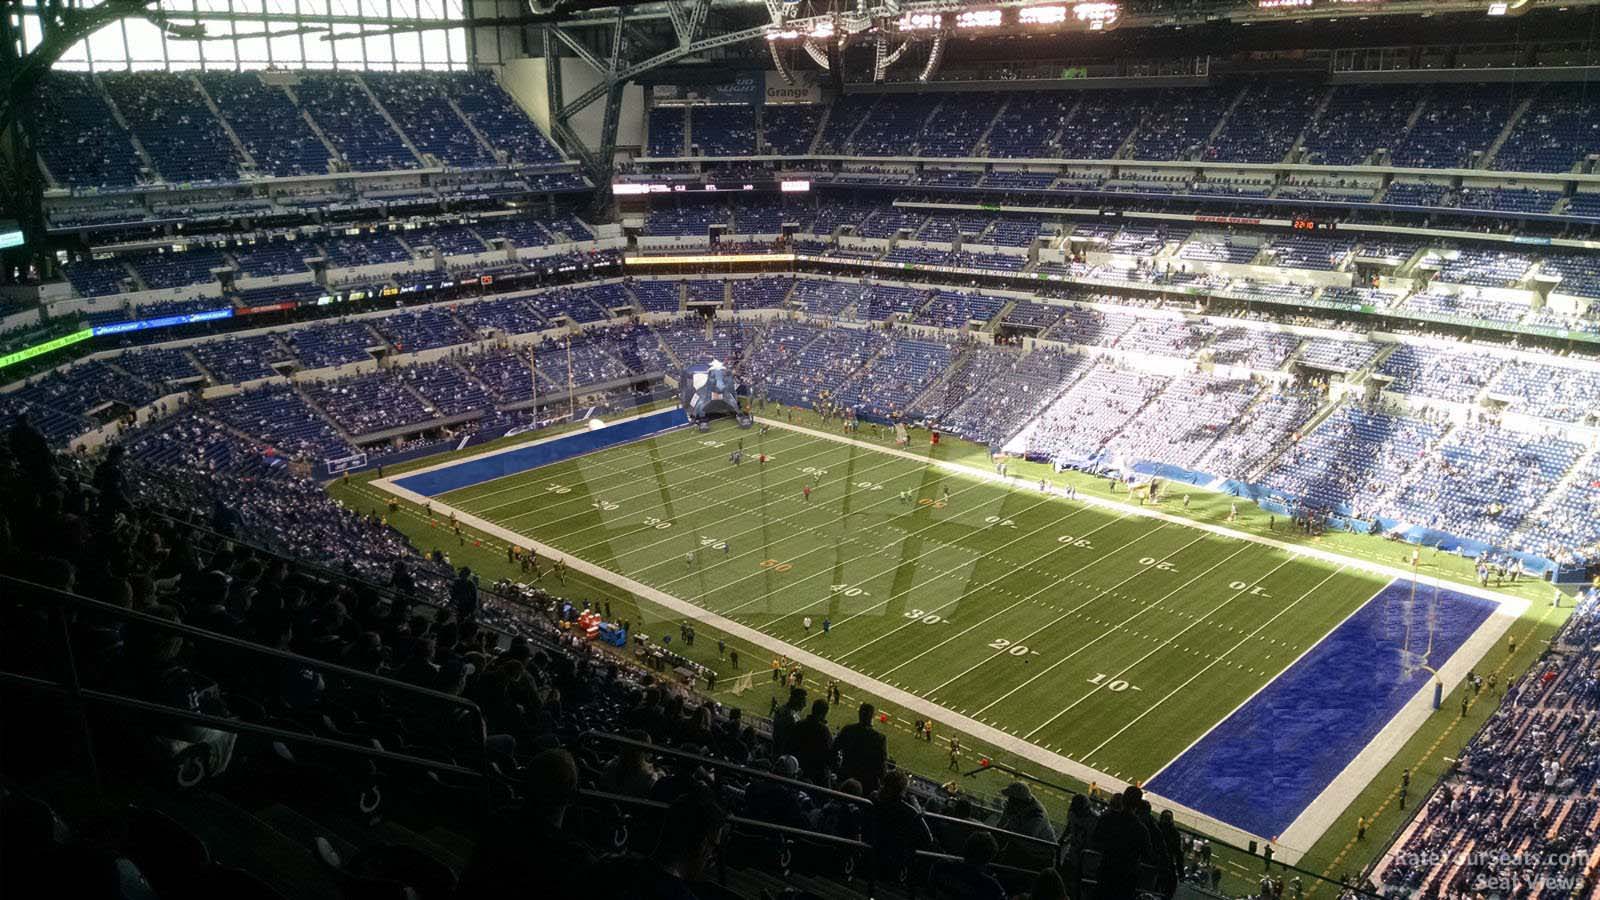 section 607, row 18 seat view  for football - lucas oil stadium